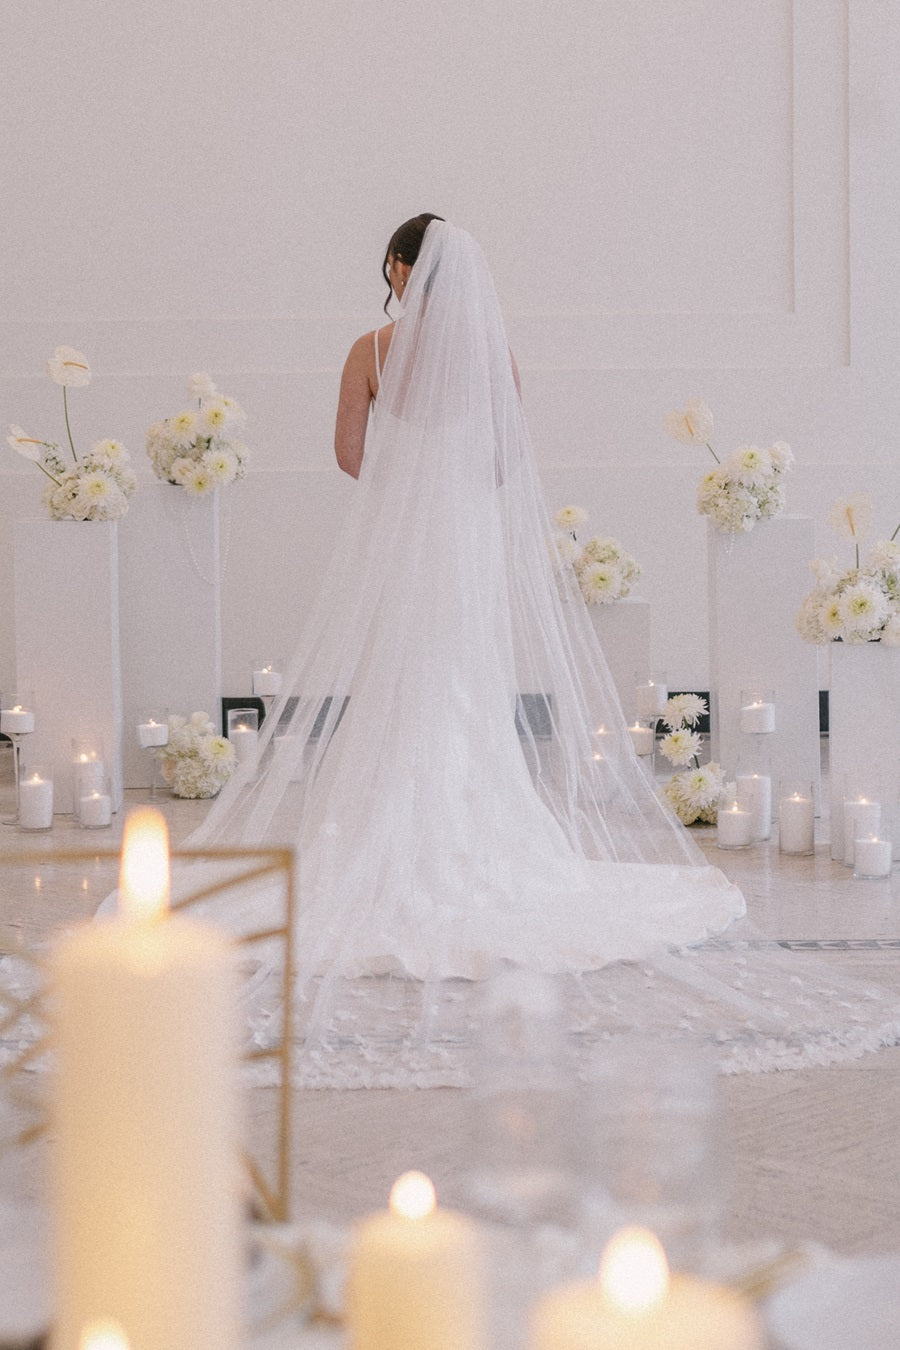 Bride stands with her back to the camera, florals in front of her and elements from the table decor showing behind her.